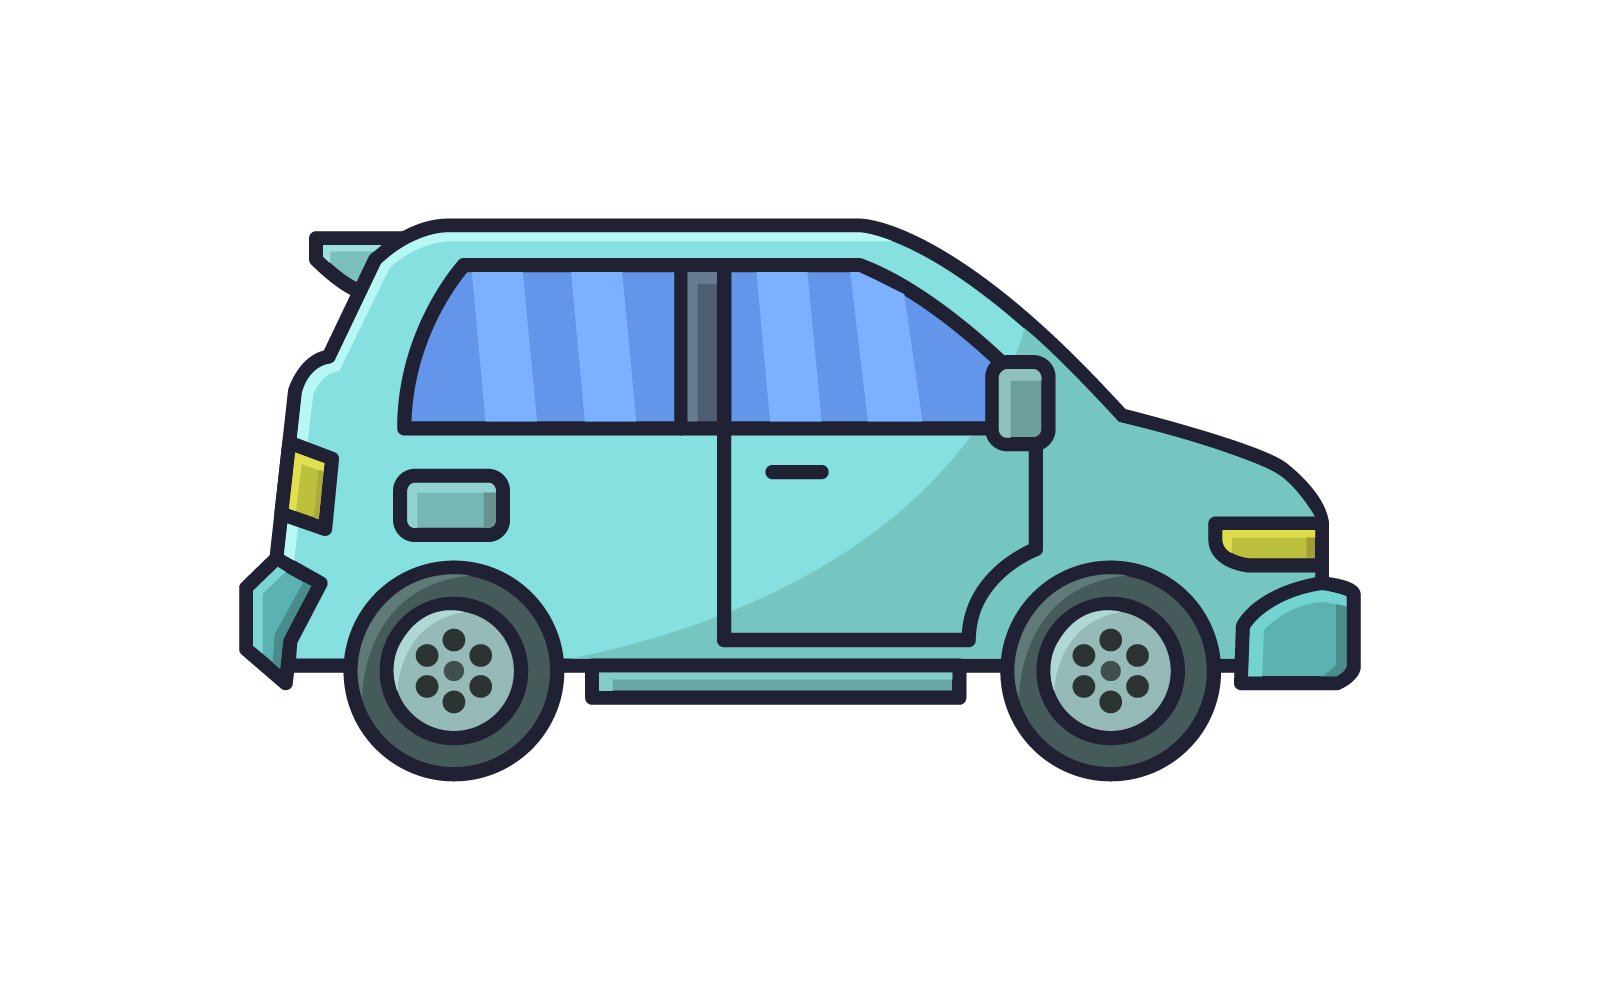 Car illustrated vectorized on a white background